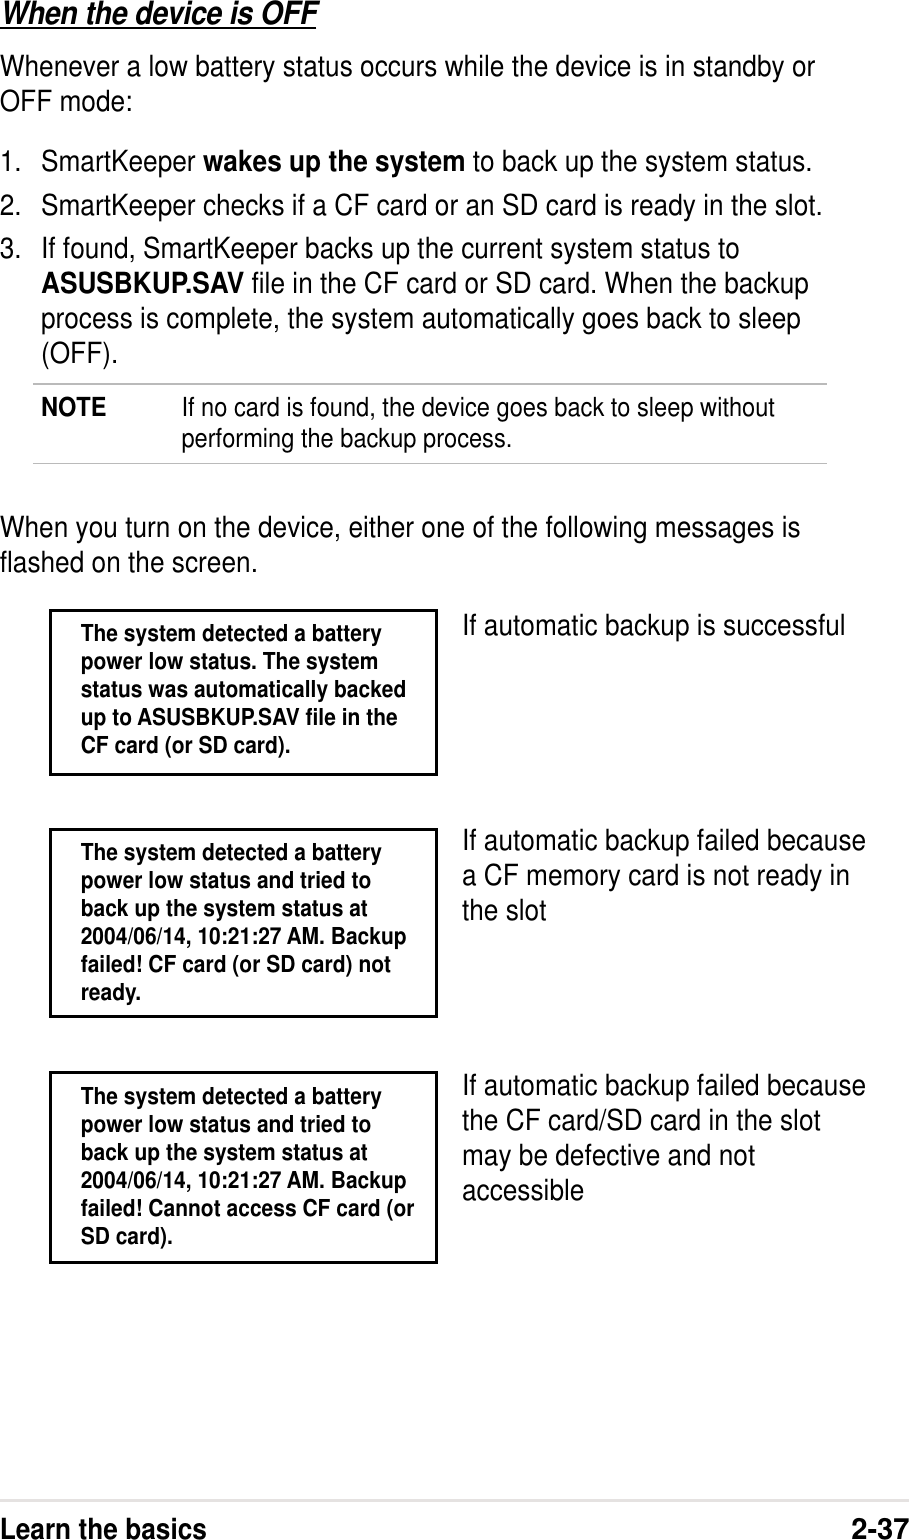 Learn the basics2-37When the device is OFFWhenever a low battery status occurs while the device is in standby orOFF mode:1. SmartKeeper wakes up the system to back up the system status.2. SmartKeeper checks if a CF card or an SD card is ready in the slot.3. If found, SmartKeeper backs up the current system status toASUSBKUP.SAV file in the CF card or SD card. When the backupprocess is complete, the system automatically goes back to sleep(OFF).NOTE If no card is found, the device goes back to sleep withoutperforming the backup process.When you turn on the device, either one of the following messages isflashed on the screen.If automatic backup is successfulThe system detected a batterypower low status. The systemstatus was automatically backedup to ASUSBKUP.SAV file in theCF card (or SD card).If automatic backup failed becausea CF memory card is not ready inthe slotThe system detected a batterypower low status and tried toback up the system status at2004/06/14, 10:21:27 AM. Backupfailed! Cannot access CF card (orSD card).If automatic backup failed becausethe CF card/SD card in the slotmay be defective and notaccessibleThe system detected a batterypower low status and tried toback up the system status at2004/06/14, 10:21:27 AM. Backupfailed! CF card (or SD card) notready.